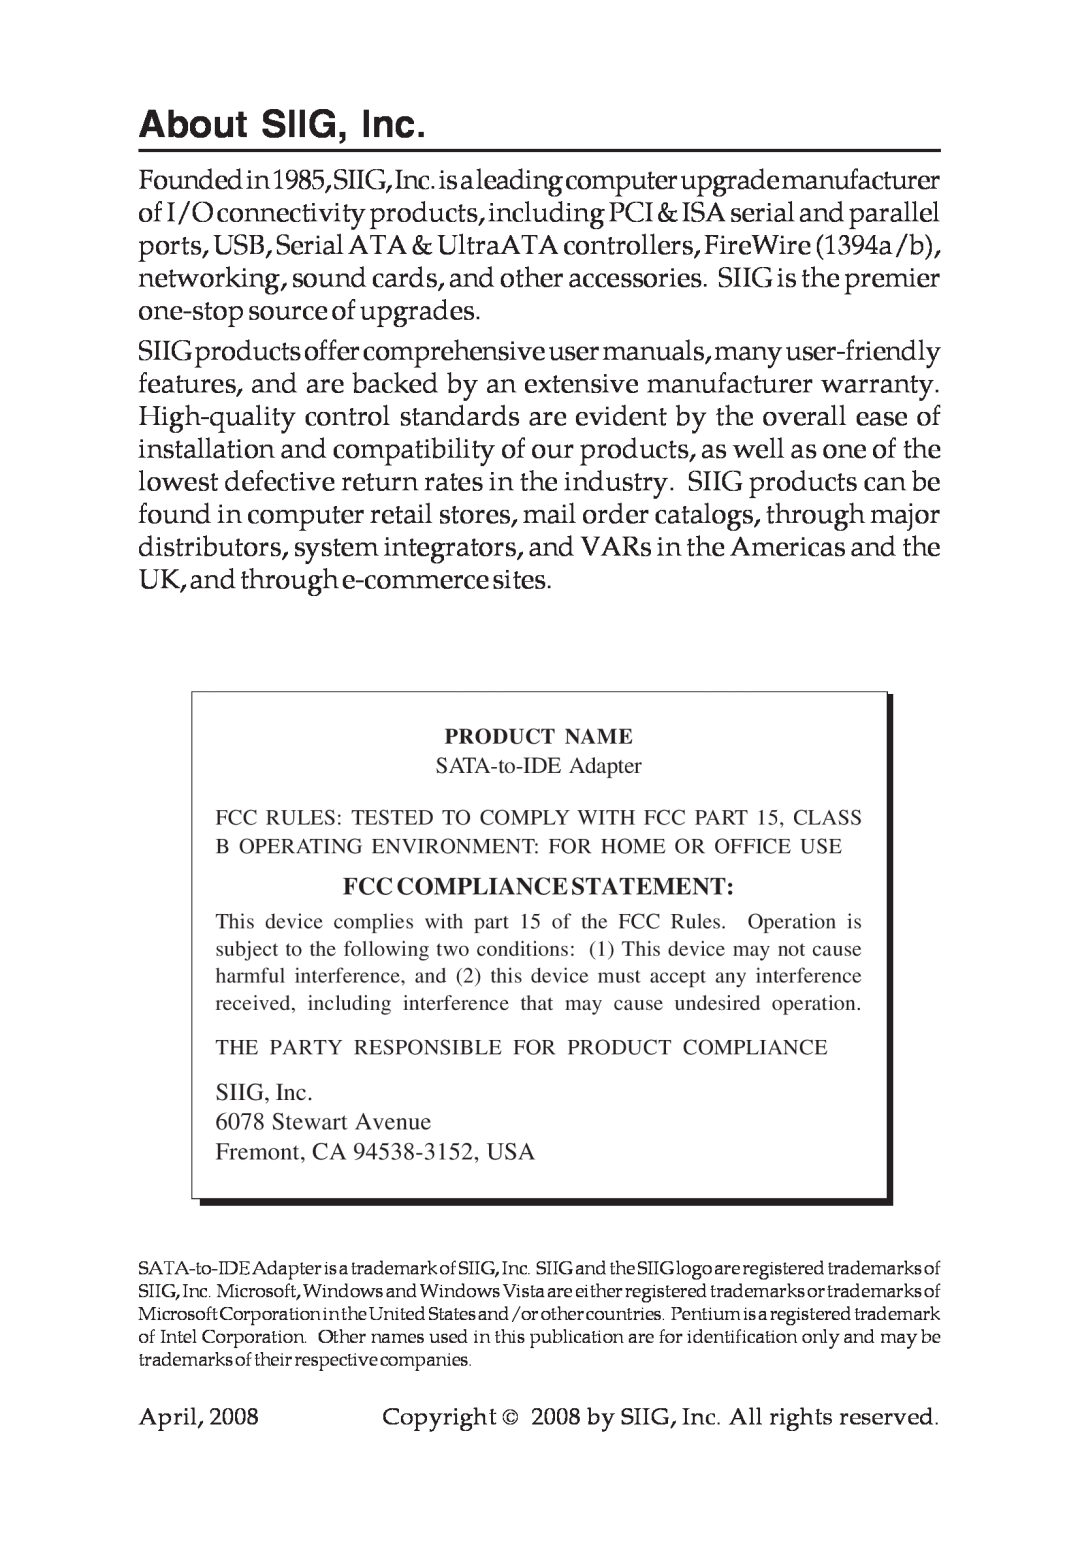 SIIG 04-0476A specifications About SIIG, Inc, Fcc Compliance Statement 